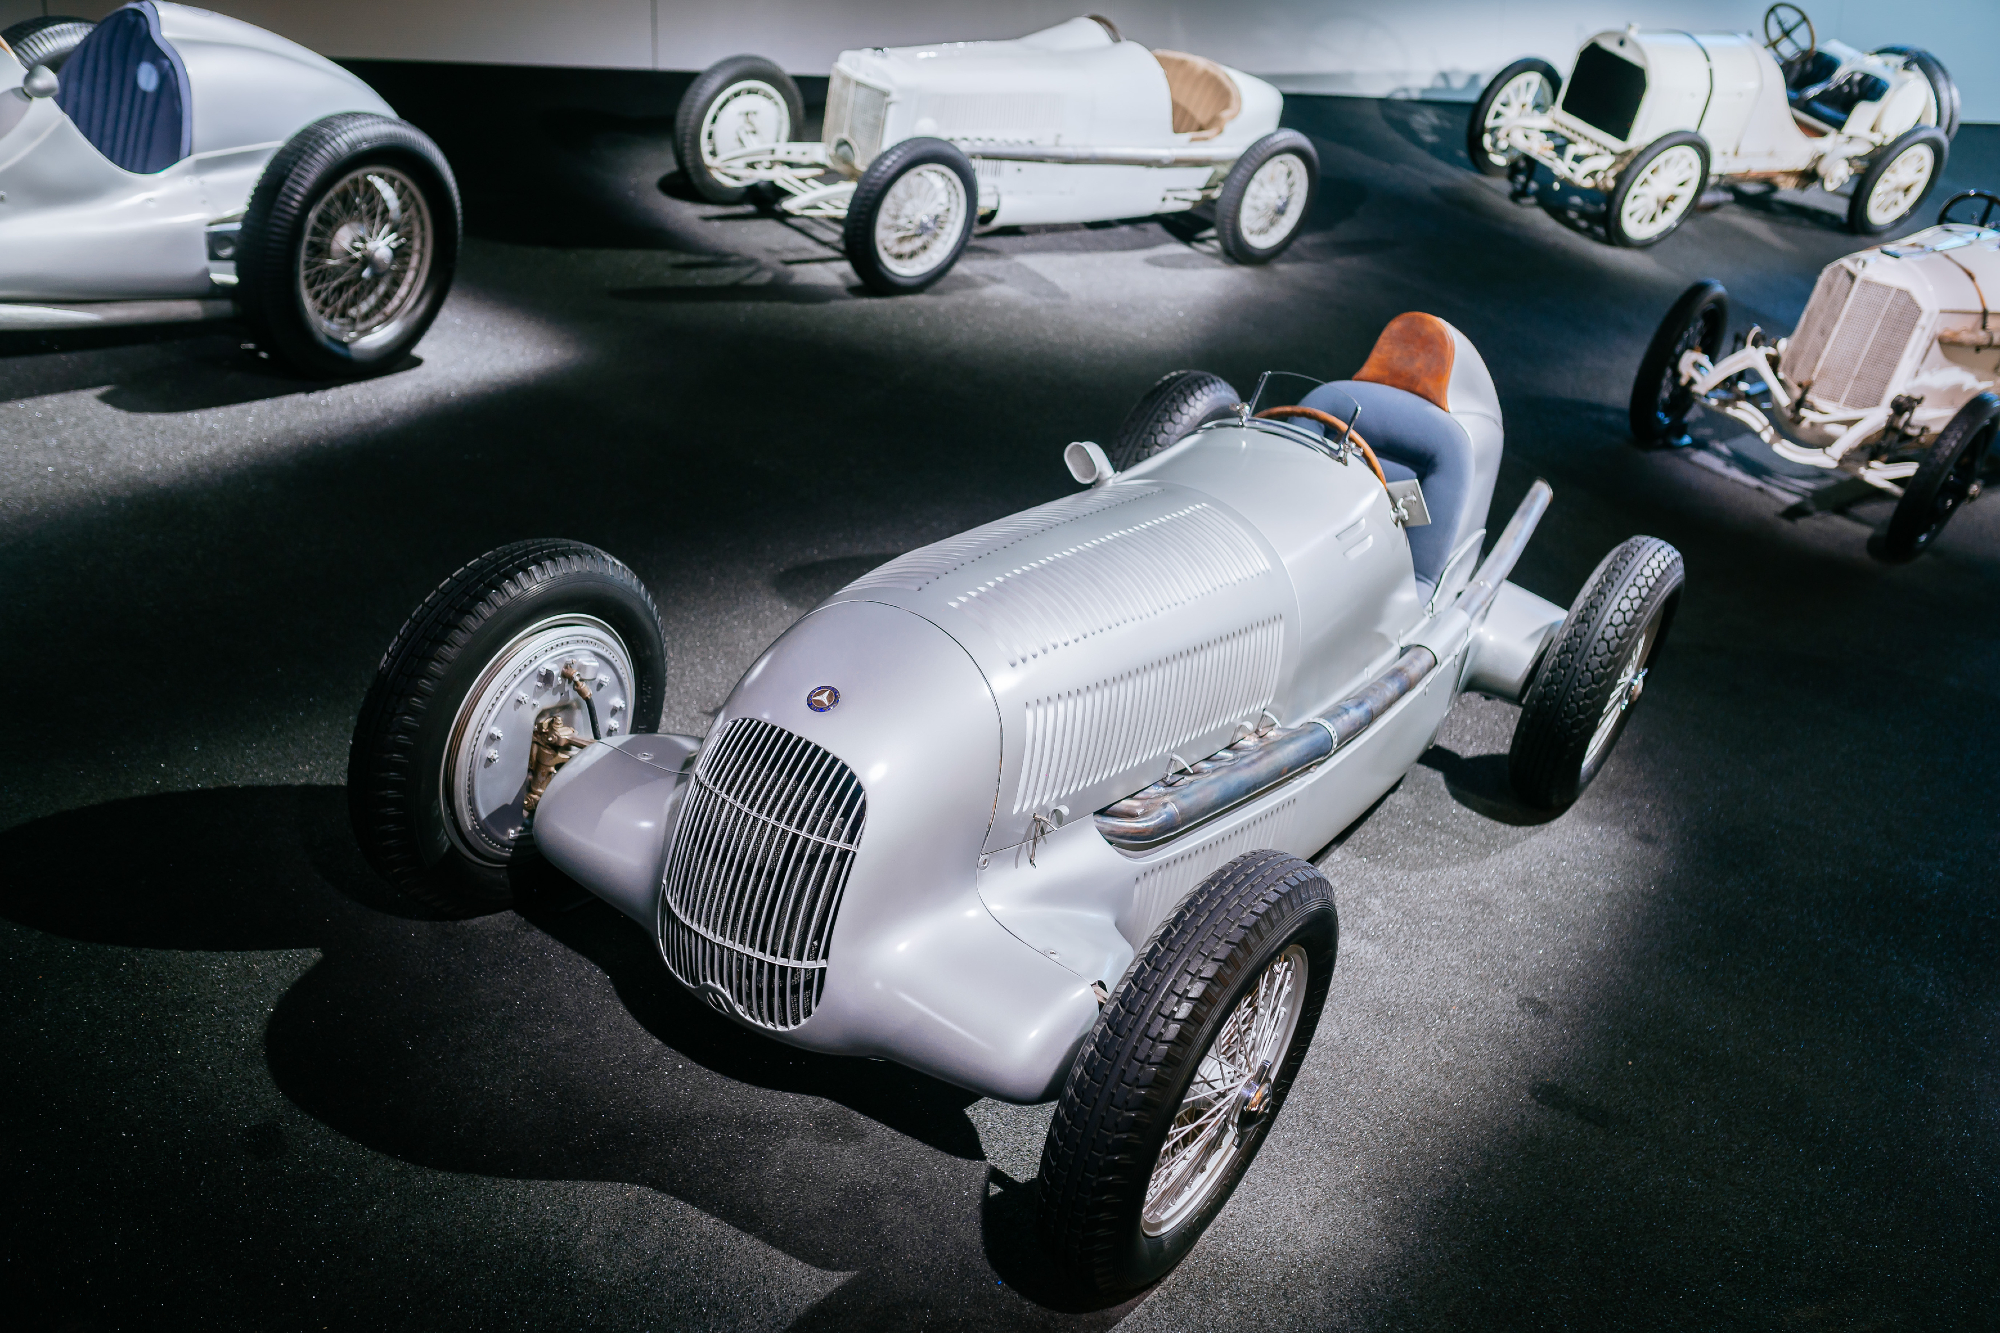 Mercedes-Benz Silver Arrow W25 single-seat race car on display at the Mercedes-Benz Museum.